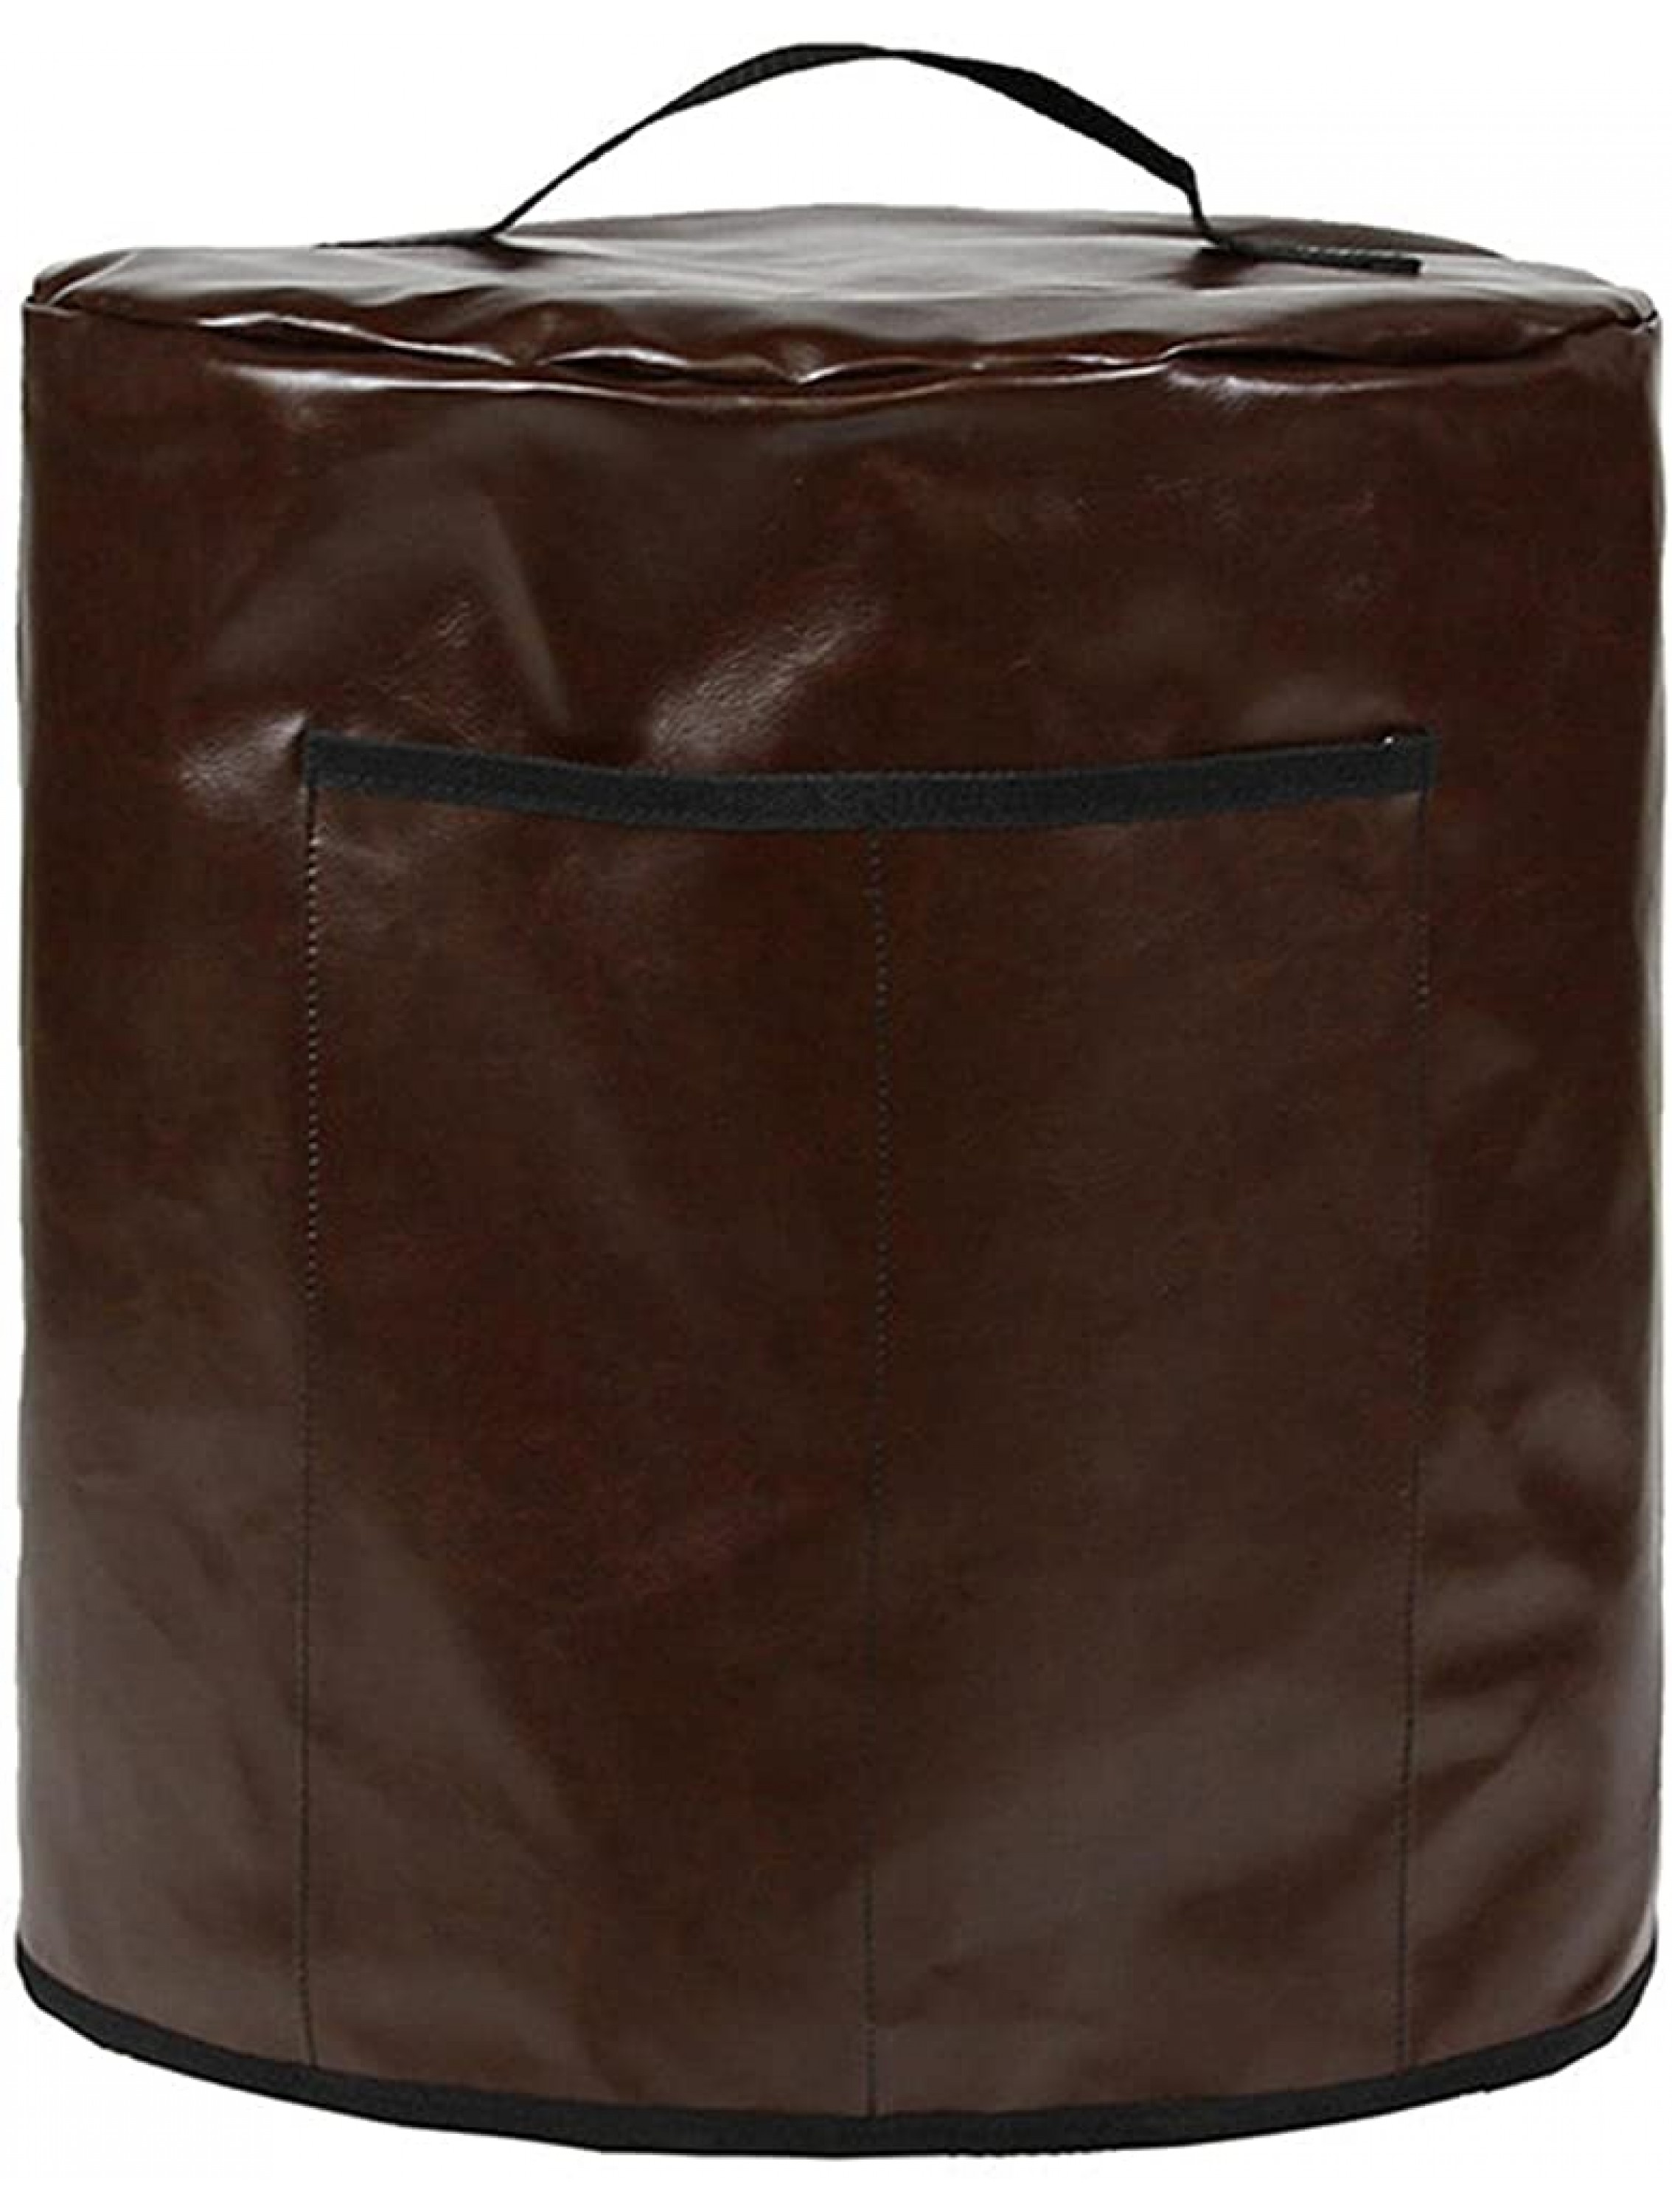 Pressure Cooker Dust Cover Pressure Cooker Cover Rice Cooker Cover with Top Handle and Pockets for for 8QT Instant Pot Rice Cooker,Wipeable Lining Artificial Leather Dust CoverBrown,14.96x15.24 - BV5A3QQRK